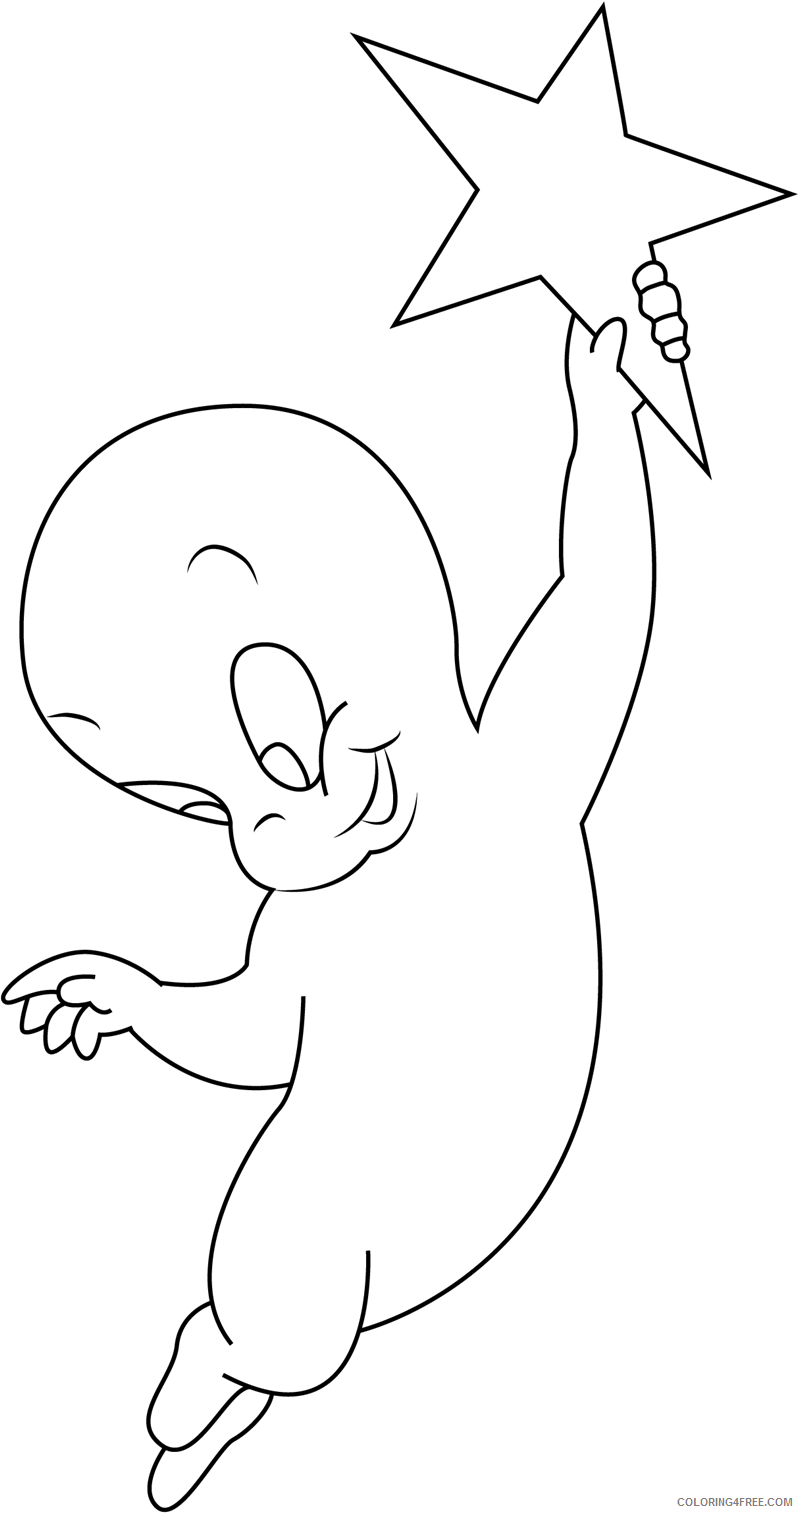 Ghost Coloring Pages friendly ghost with star Printable 2021 2800 Coloring4free